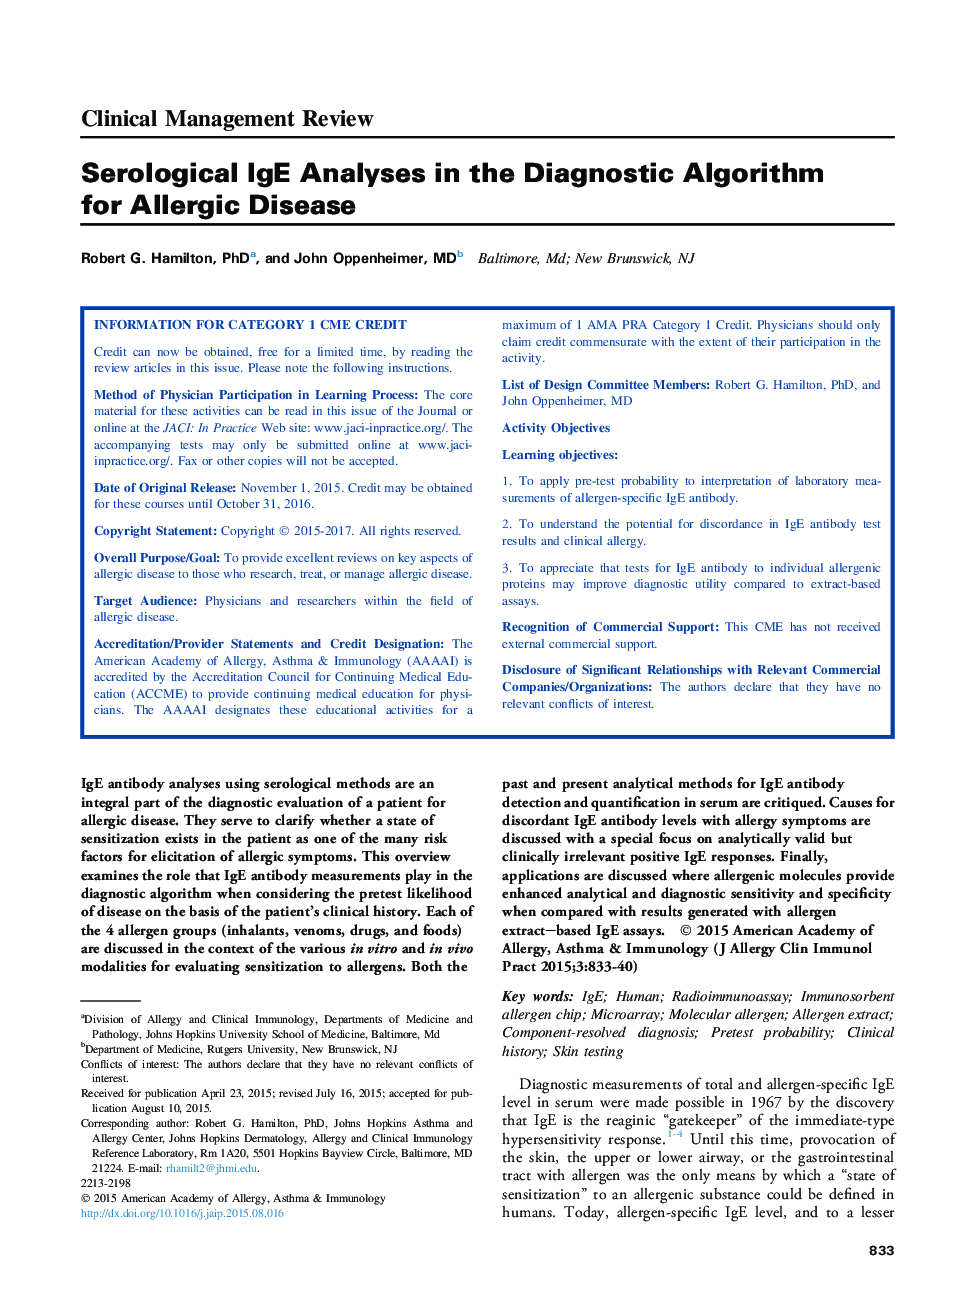 Serological IgE Analyses in the Diagnostic Algorithm for Allergic Disease